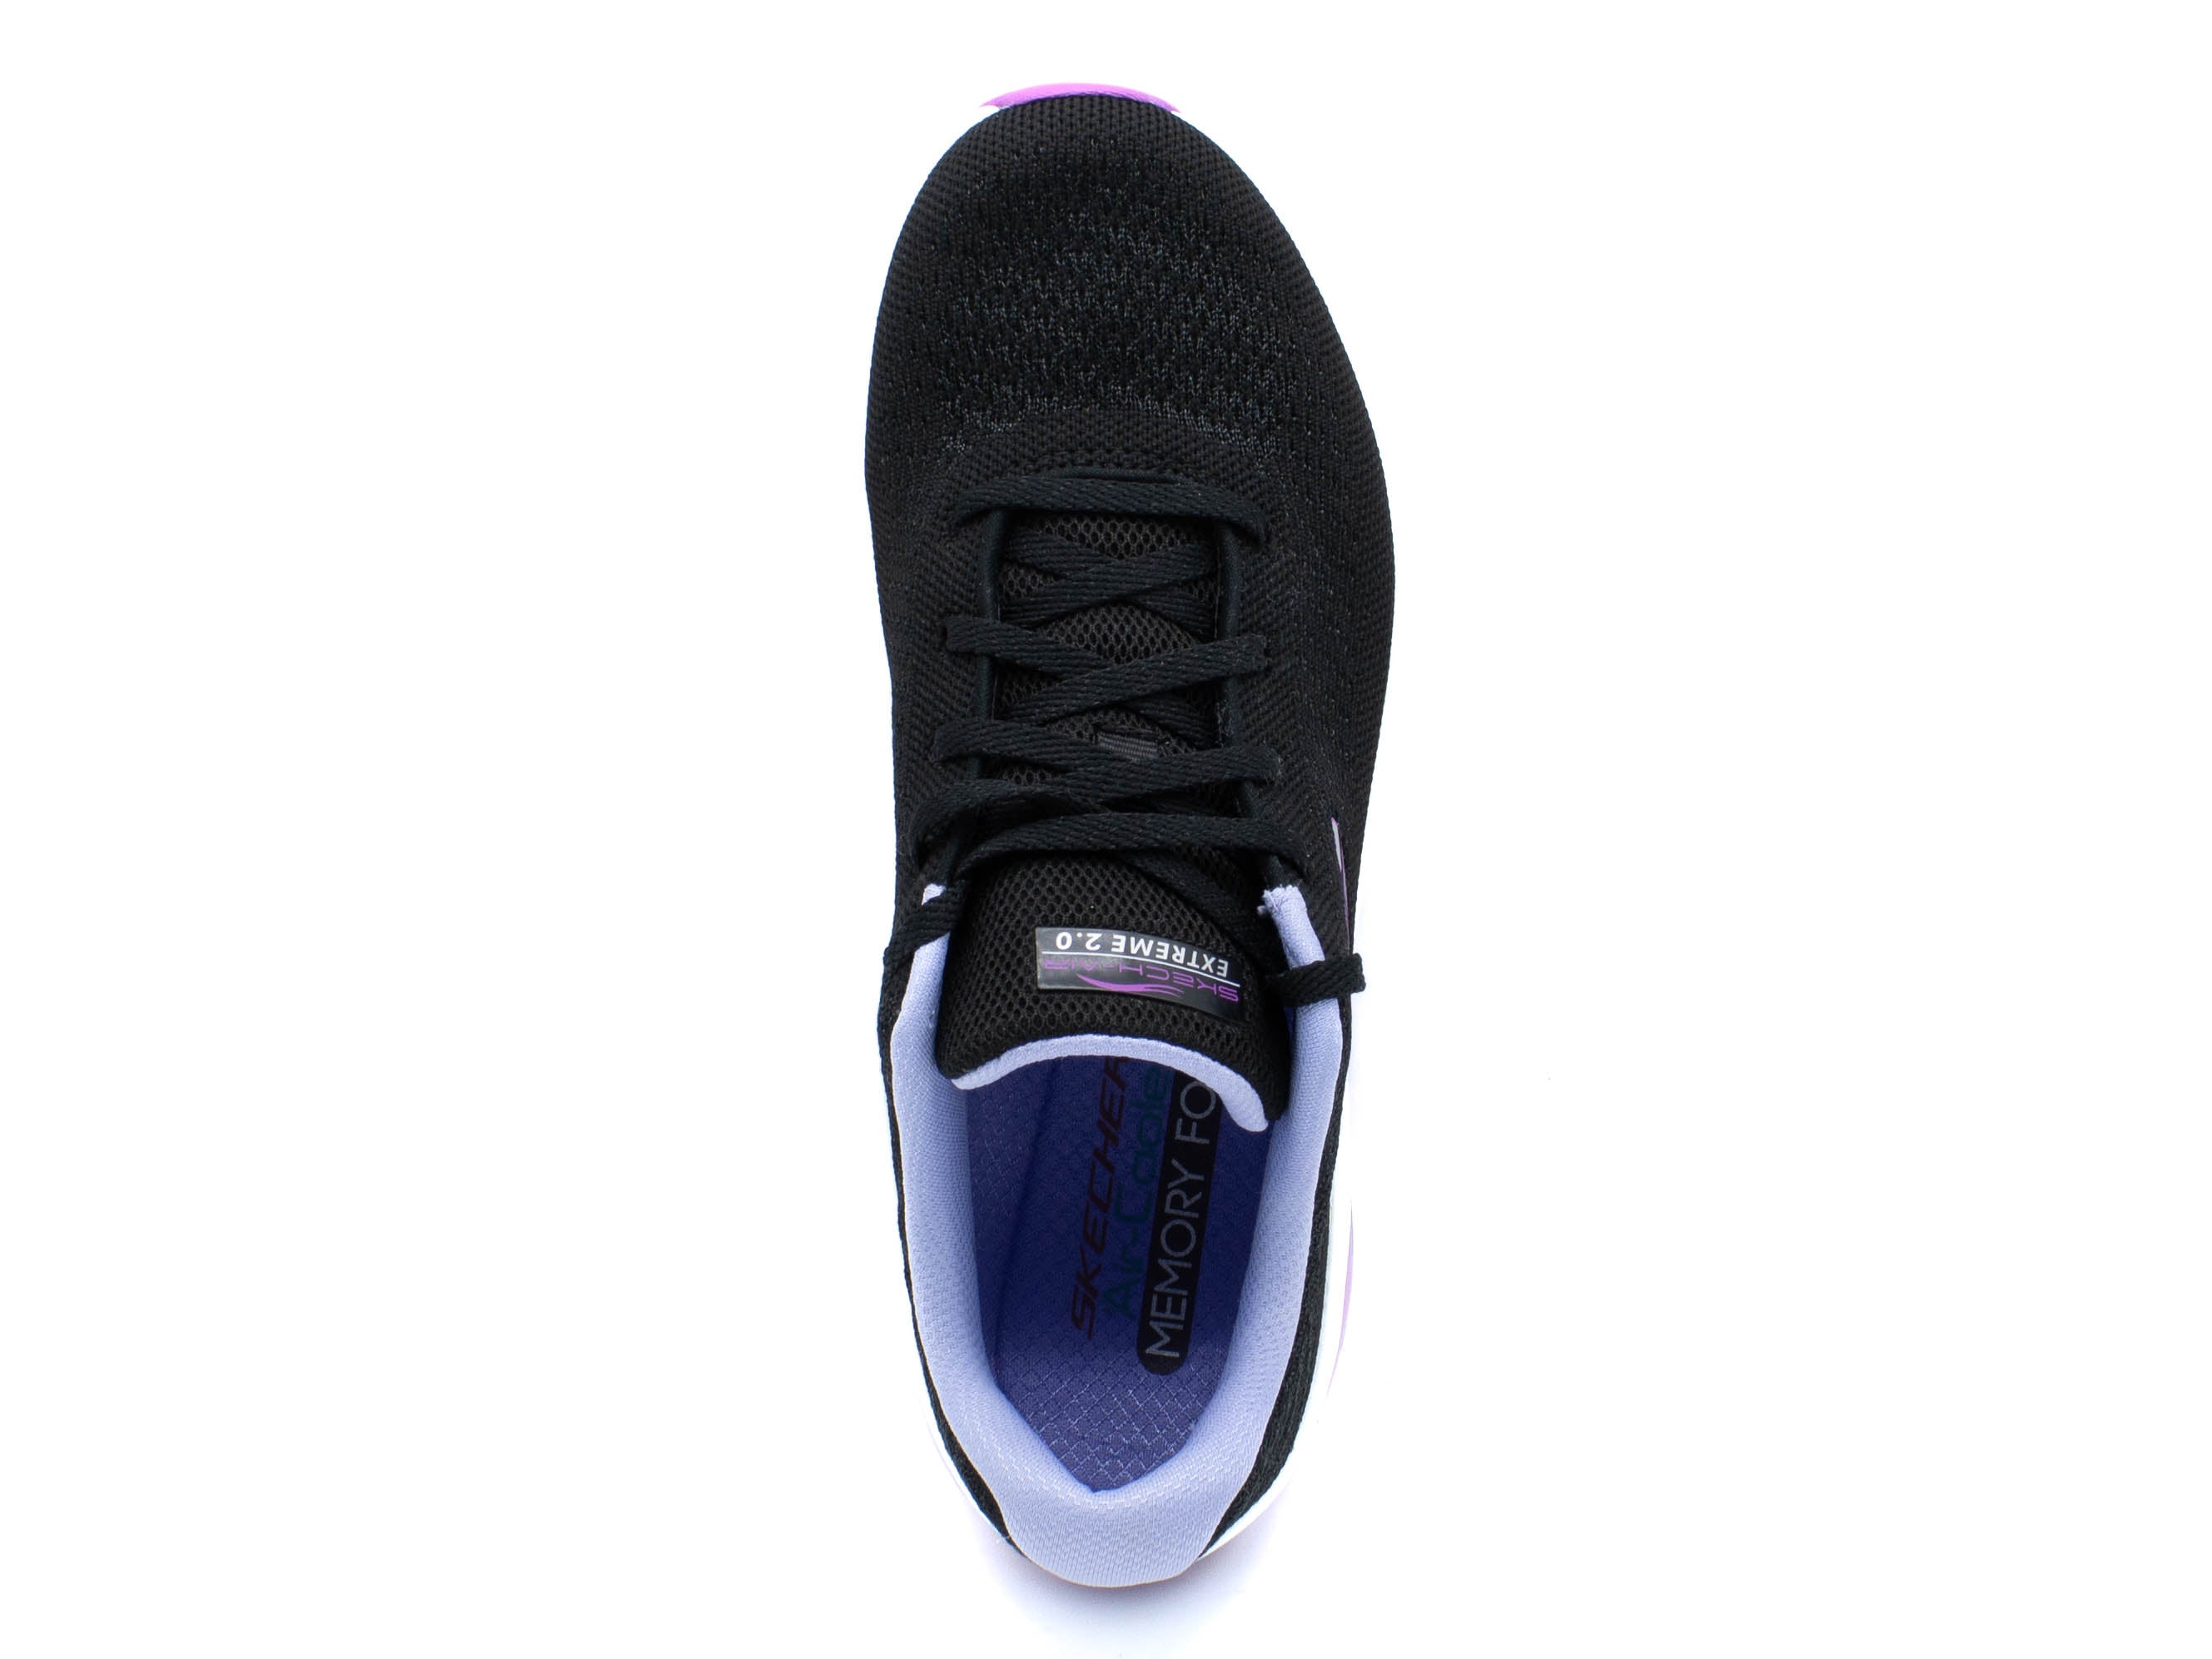 SKECHERS Skech-Air® Extreme 2.0